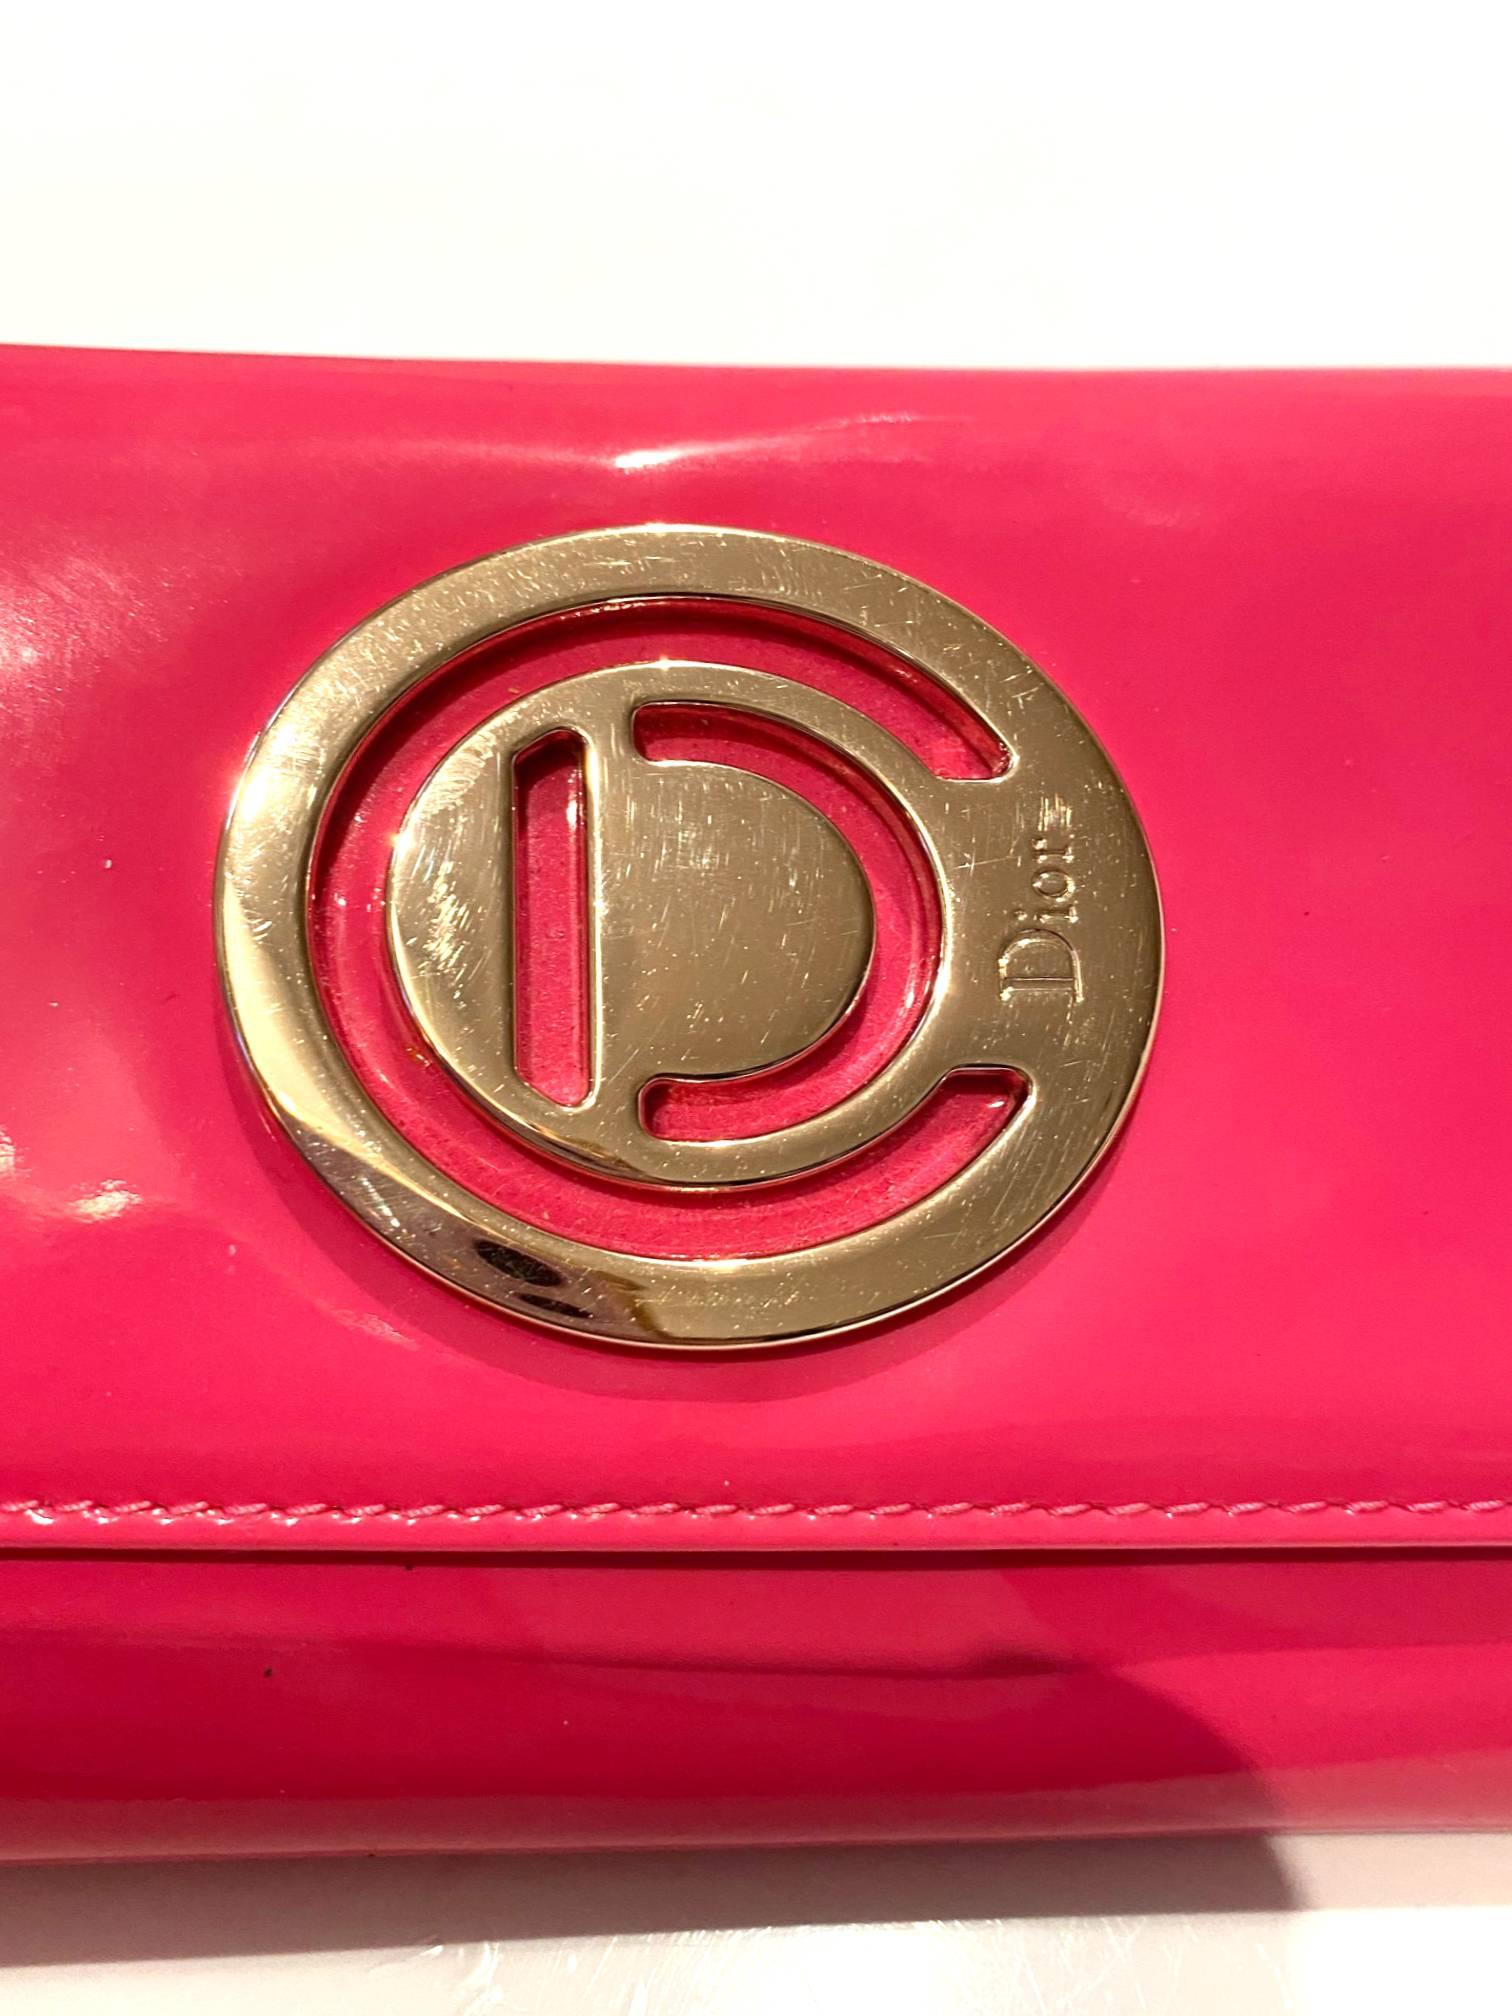 On trend Barbiecore stunning yet practical Christian Dior purse on chain, crafted from fuchsia patent leather, flap secures well with snap fastener, leather-fabric interior, Removable gold chain for carrying or converts to clutch, date code-serial